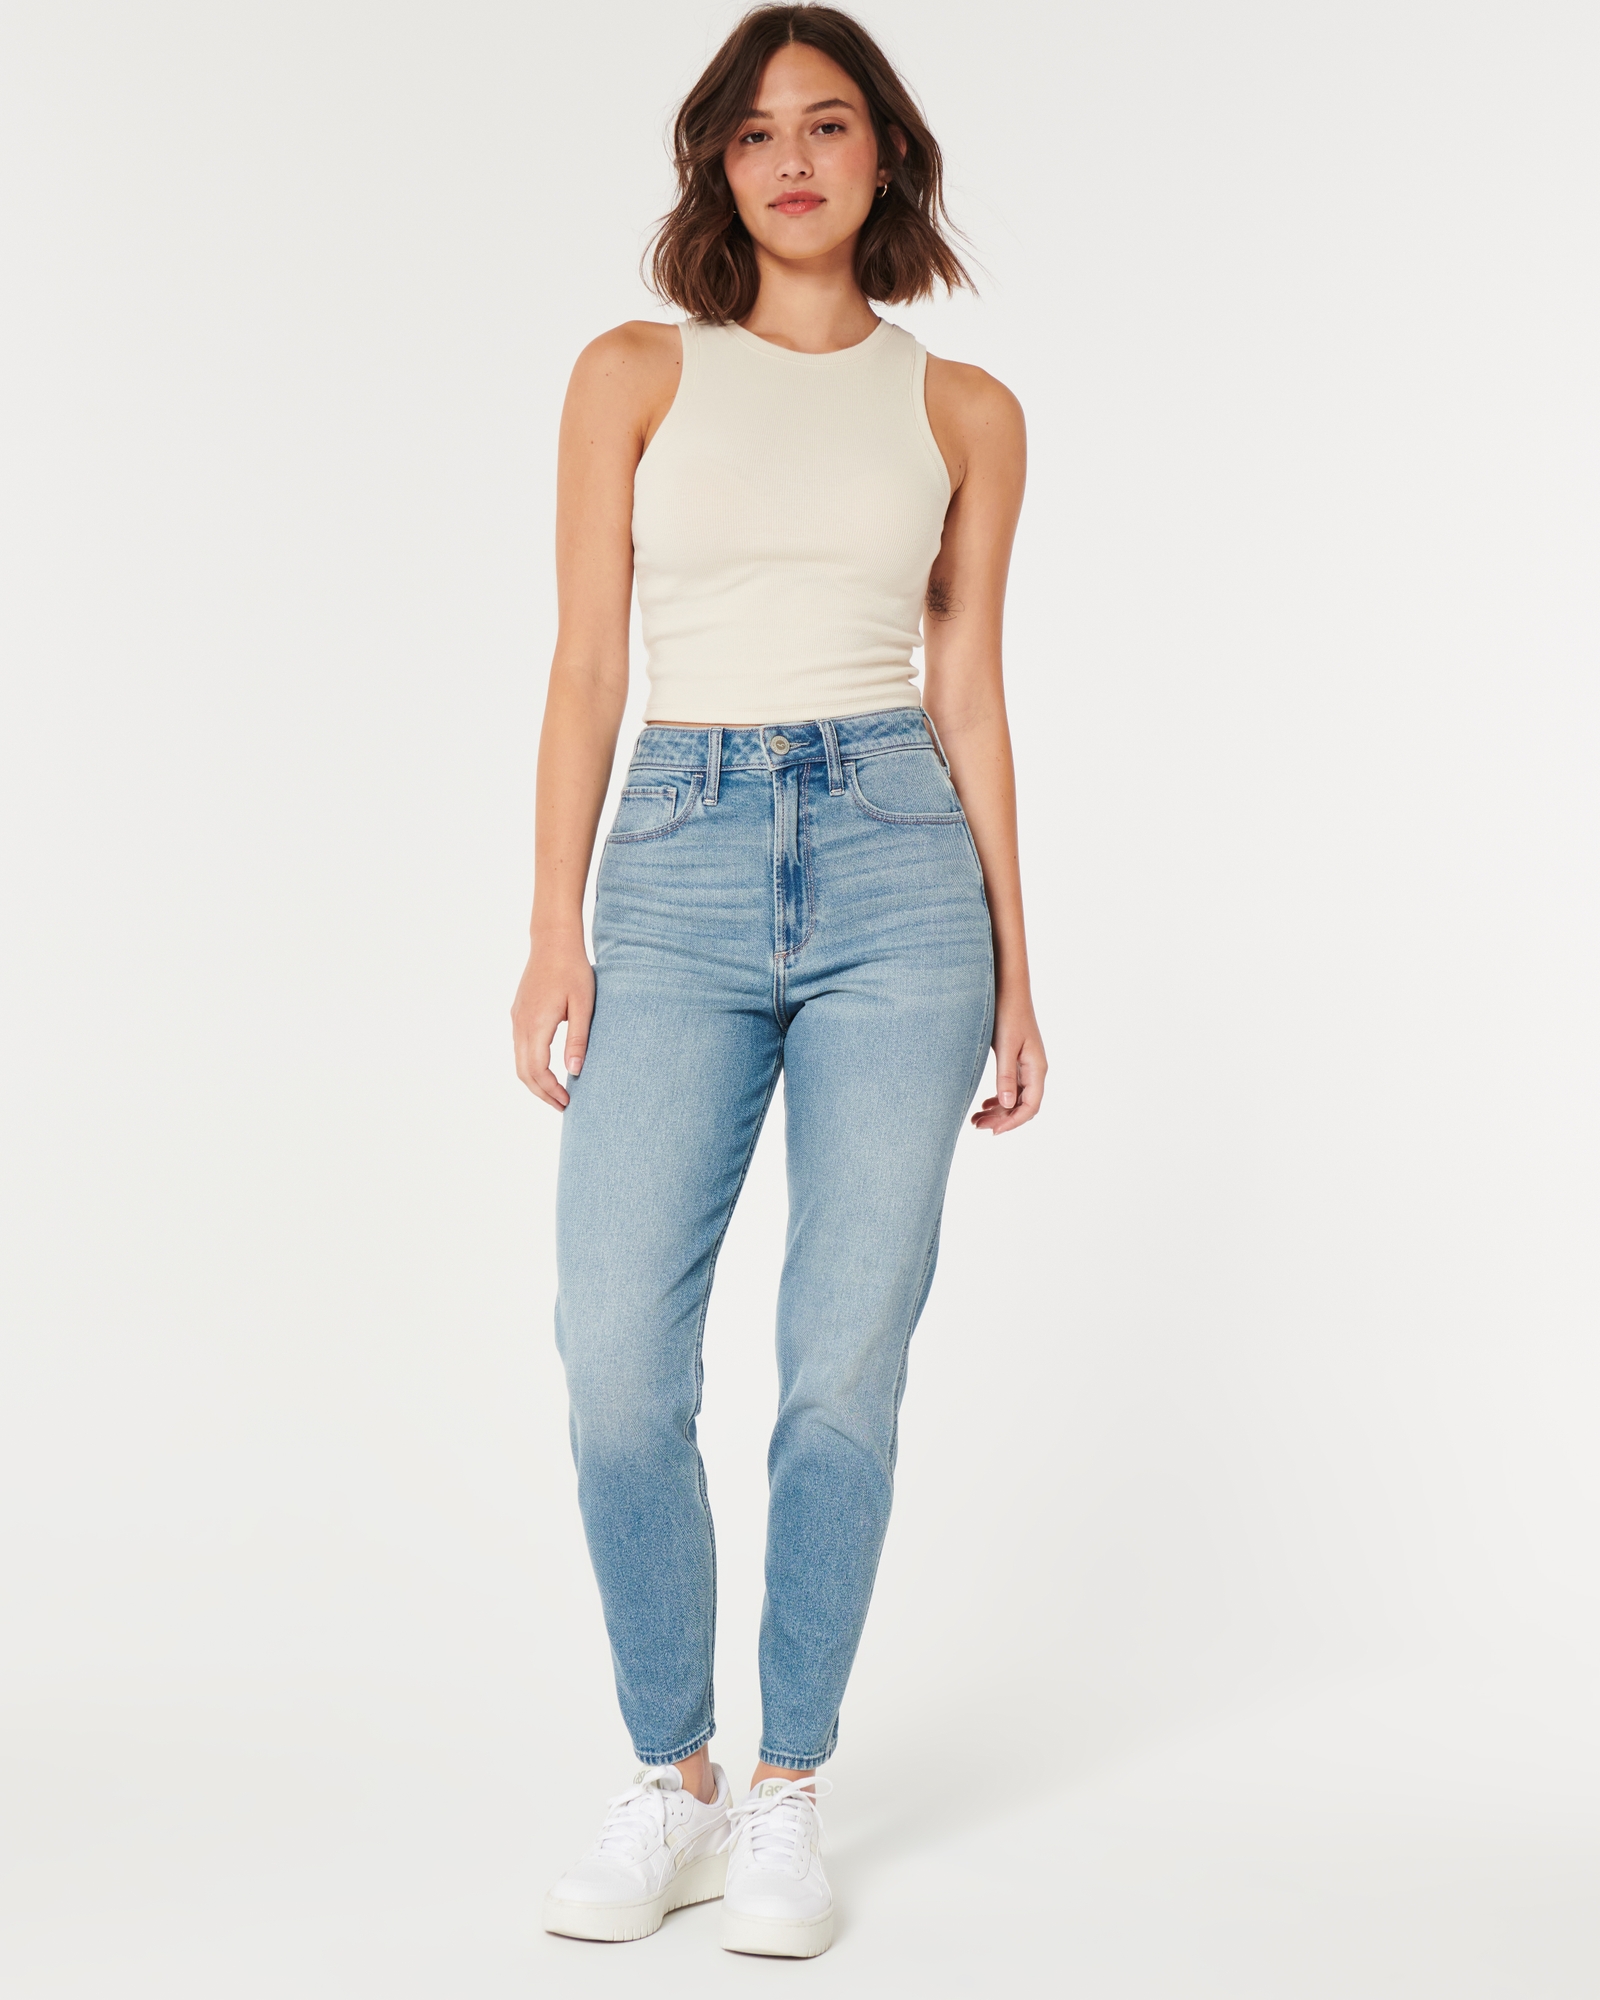 Hollister Ultra High Rise Mom Jeans Size 23 - $14 (44% Off Retail